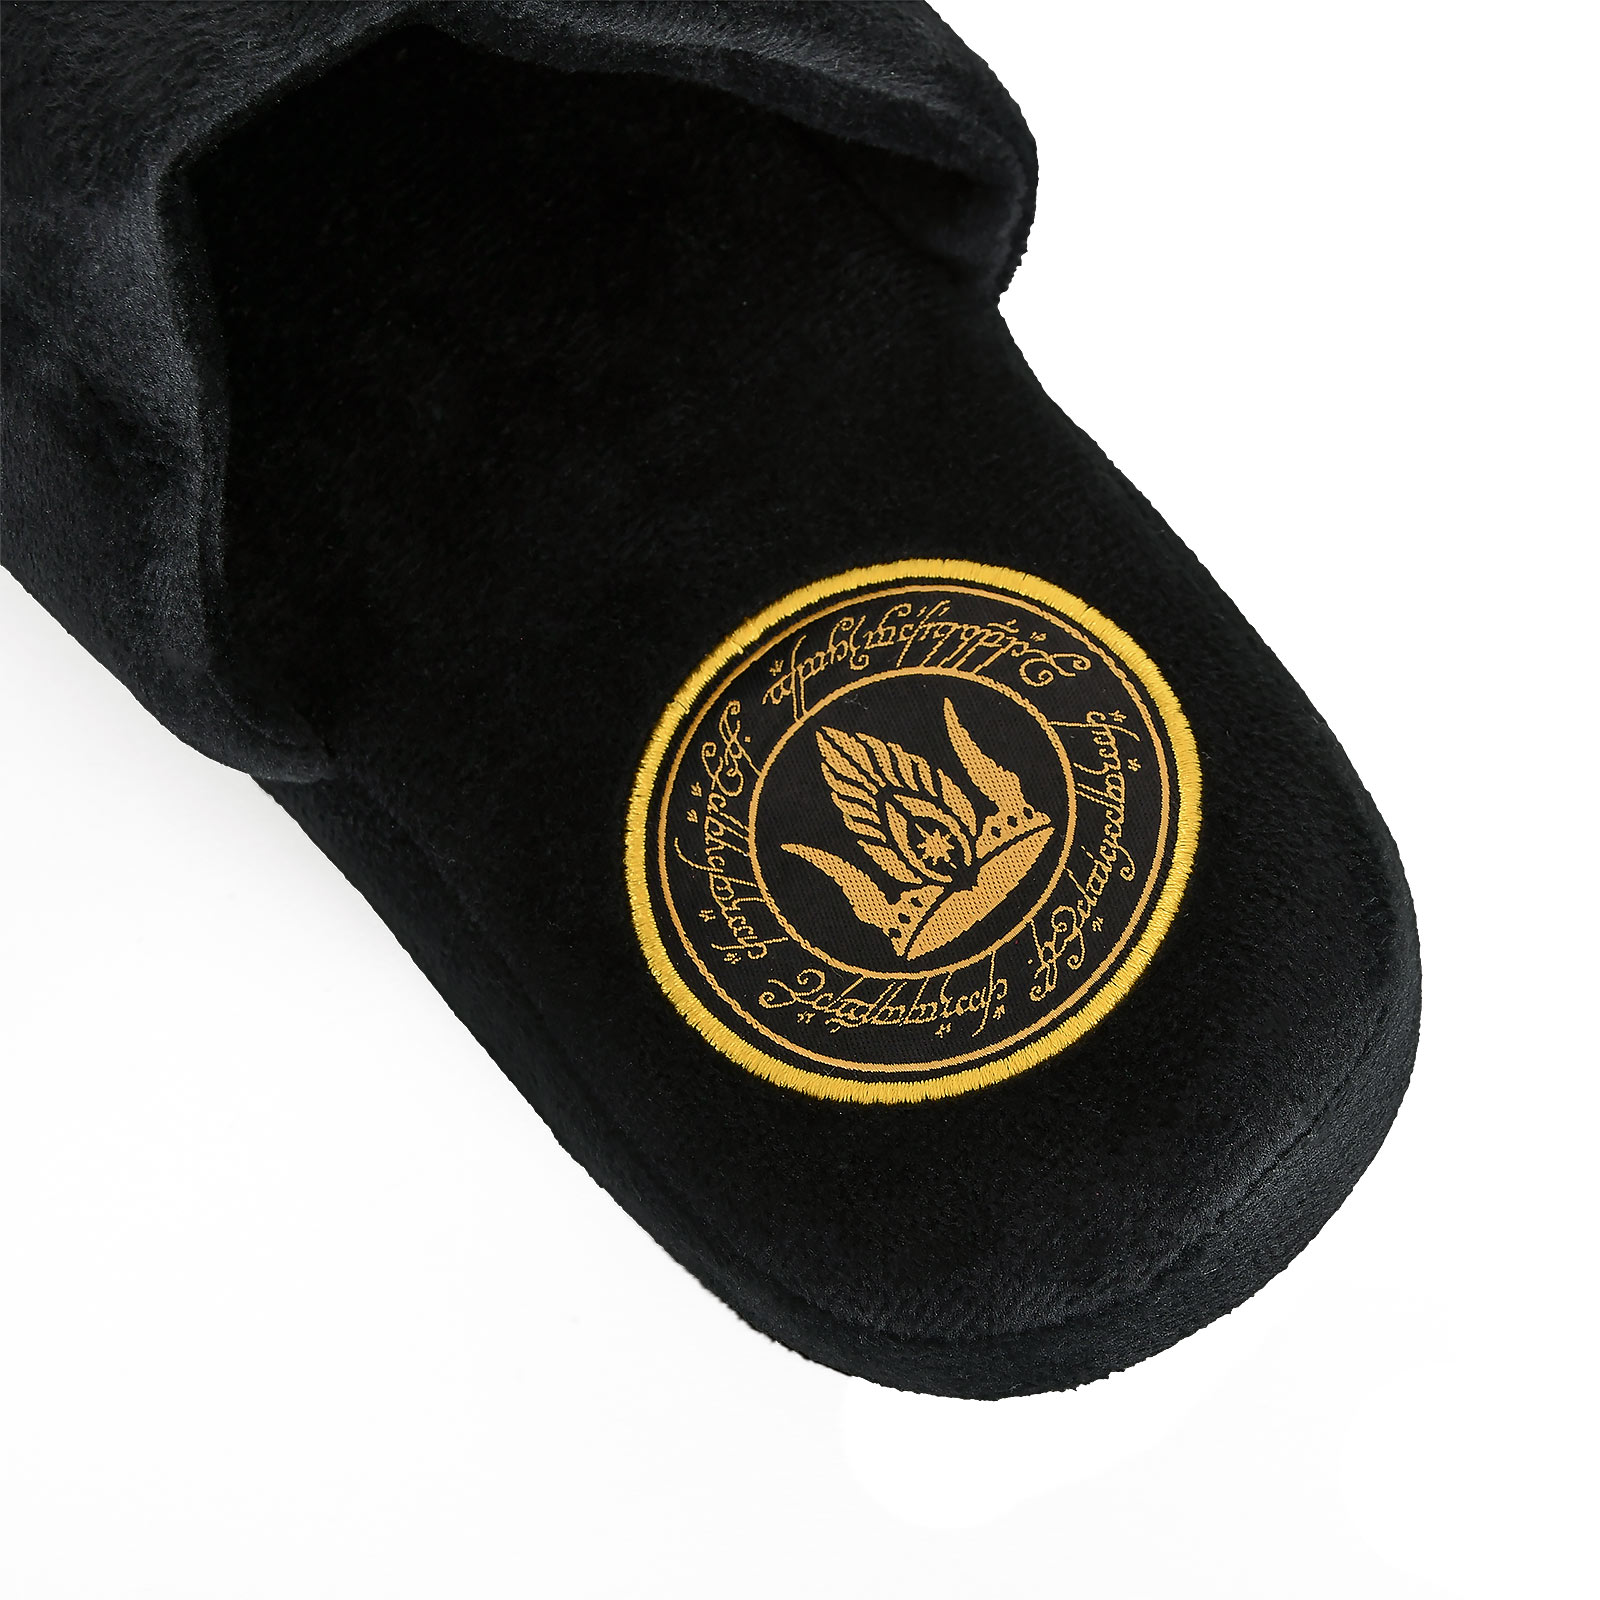 Lord of the Rings - The One Ring Slippers